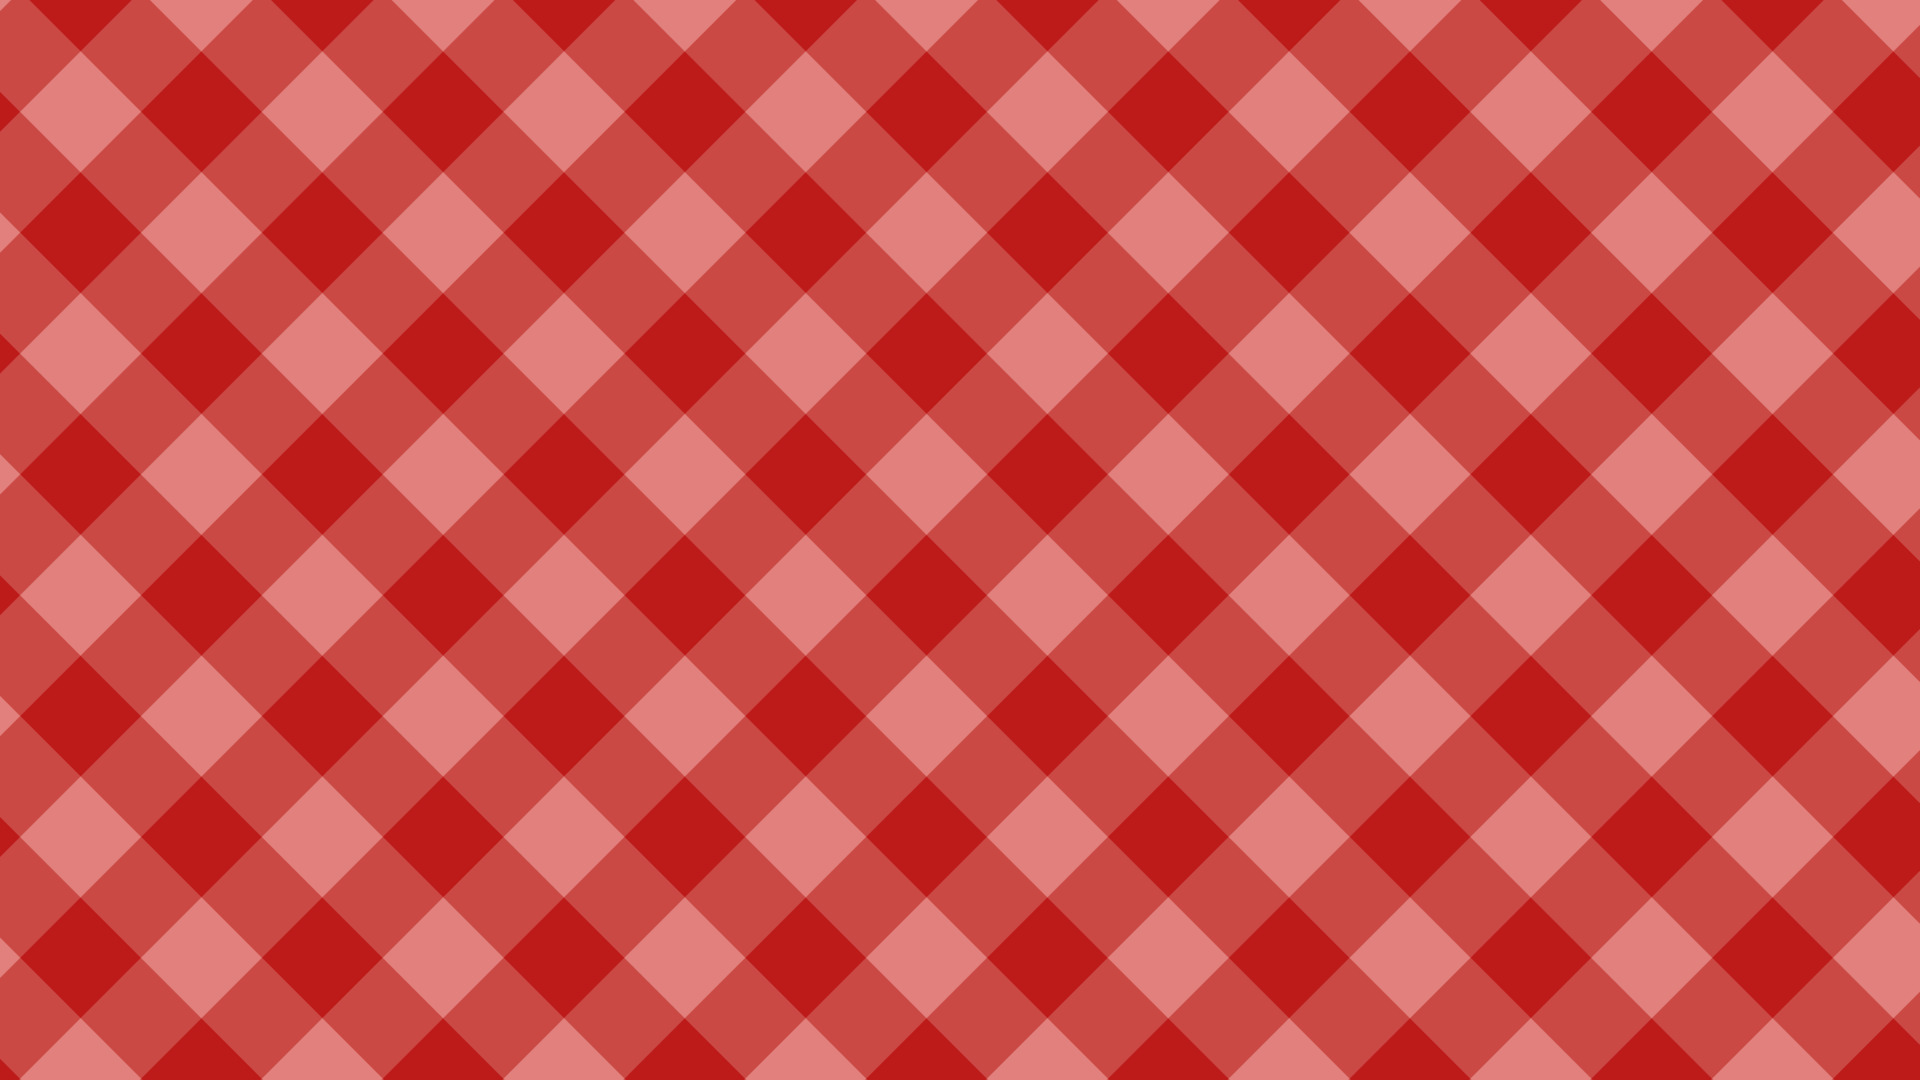 aesthetic red diagonal gingham, checkers, plaid, checkerboard wallpaper illustration, perfect for wallpaper, backdrop, background, banner, cover